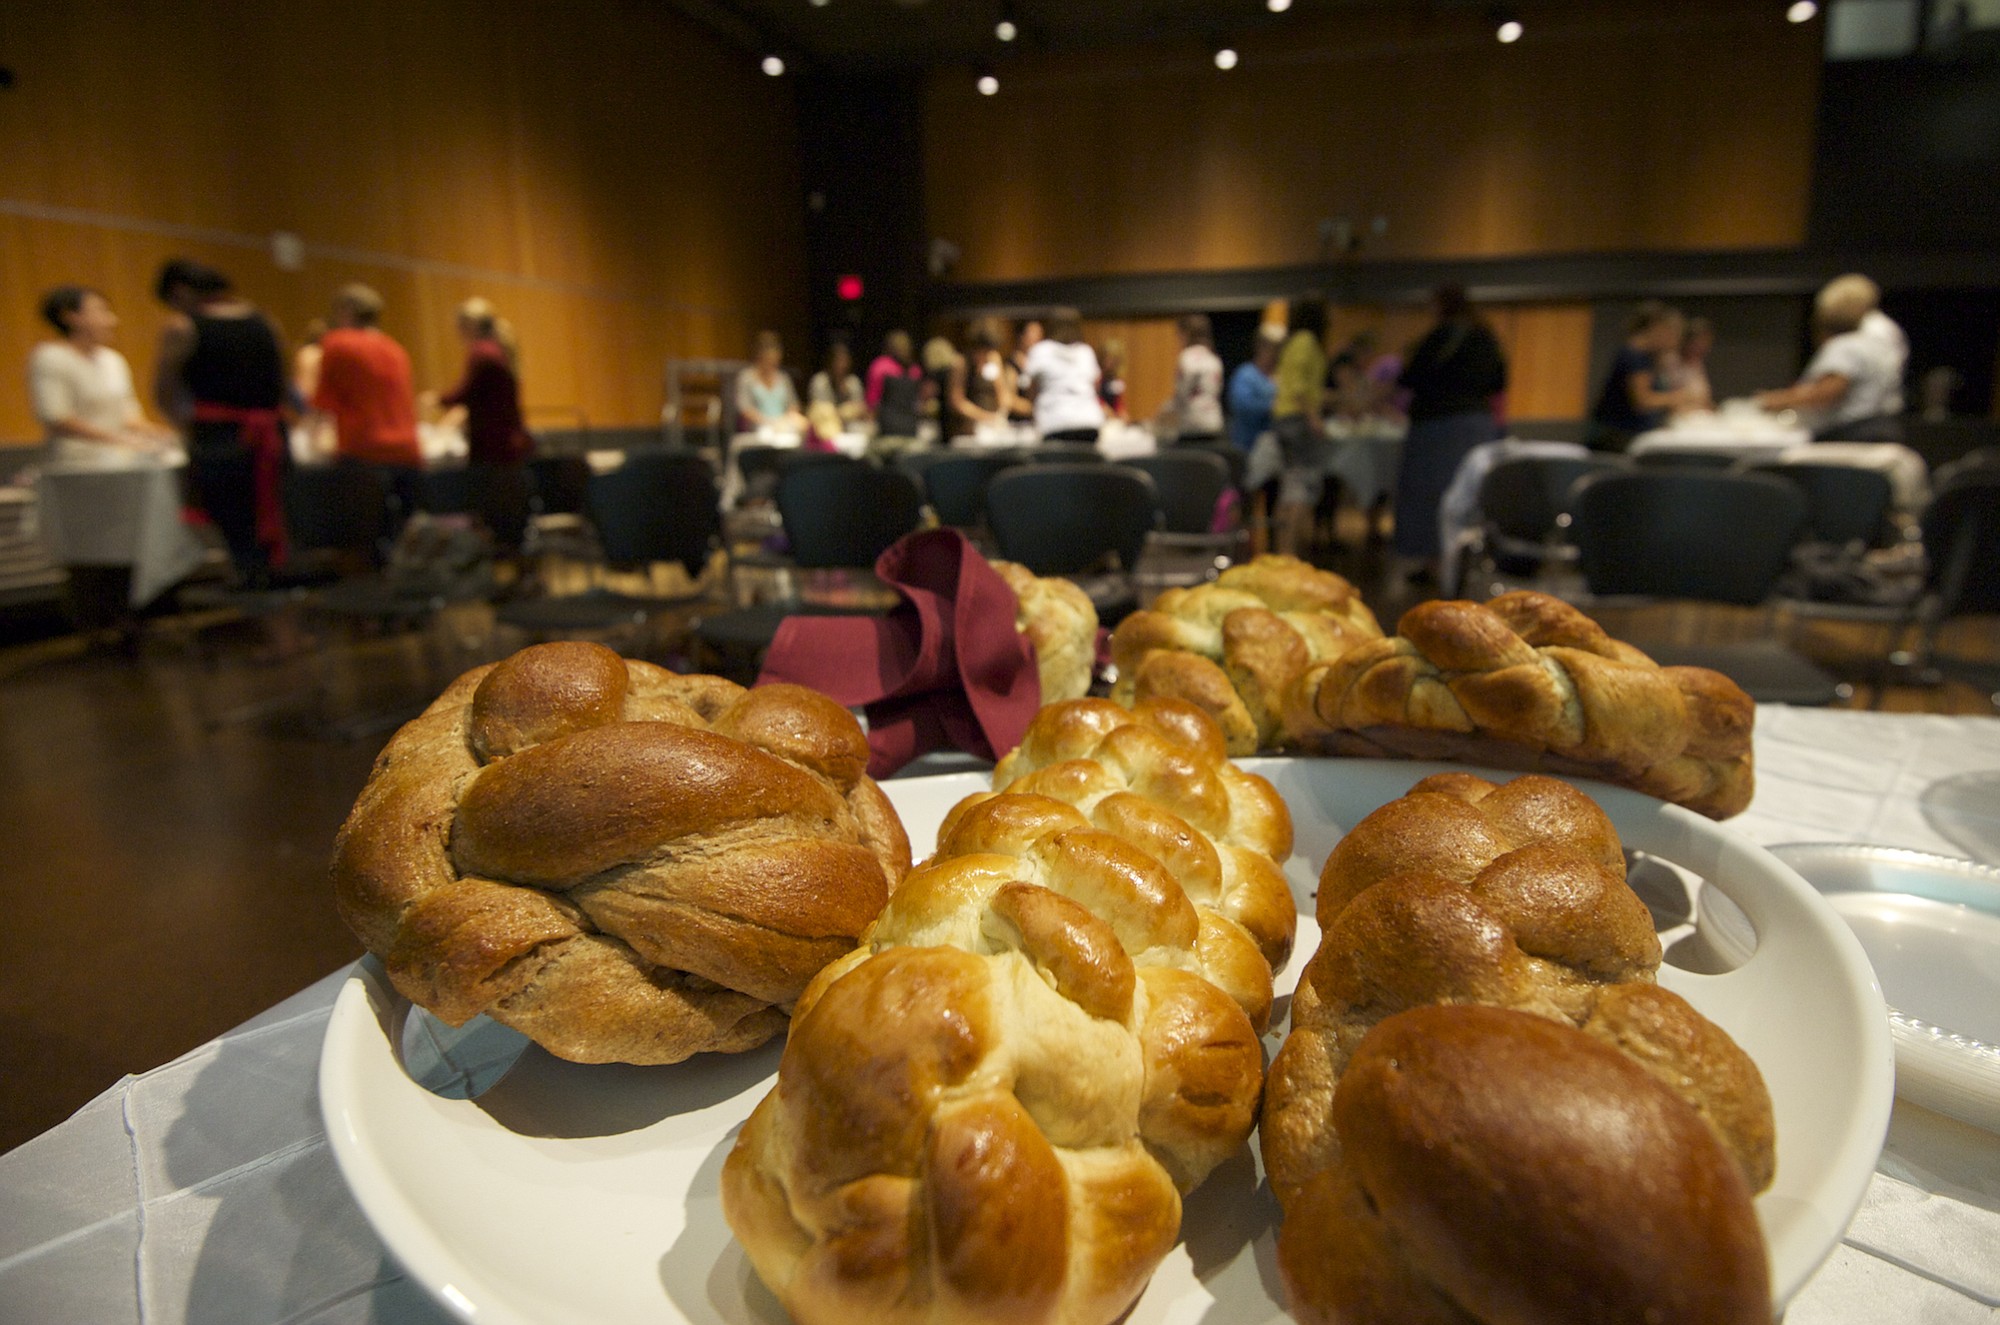 These perfect loaves of sweet challah bread were examples for the folks attempting to make their own for the first time during the &quot;Loaves of Love&quot; workshop, hosted at the downtown library by Chabad Jewish Center.